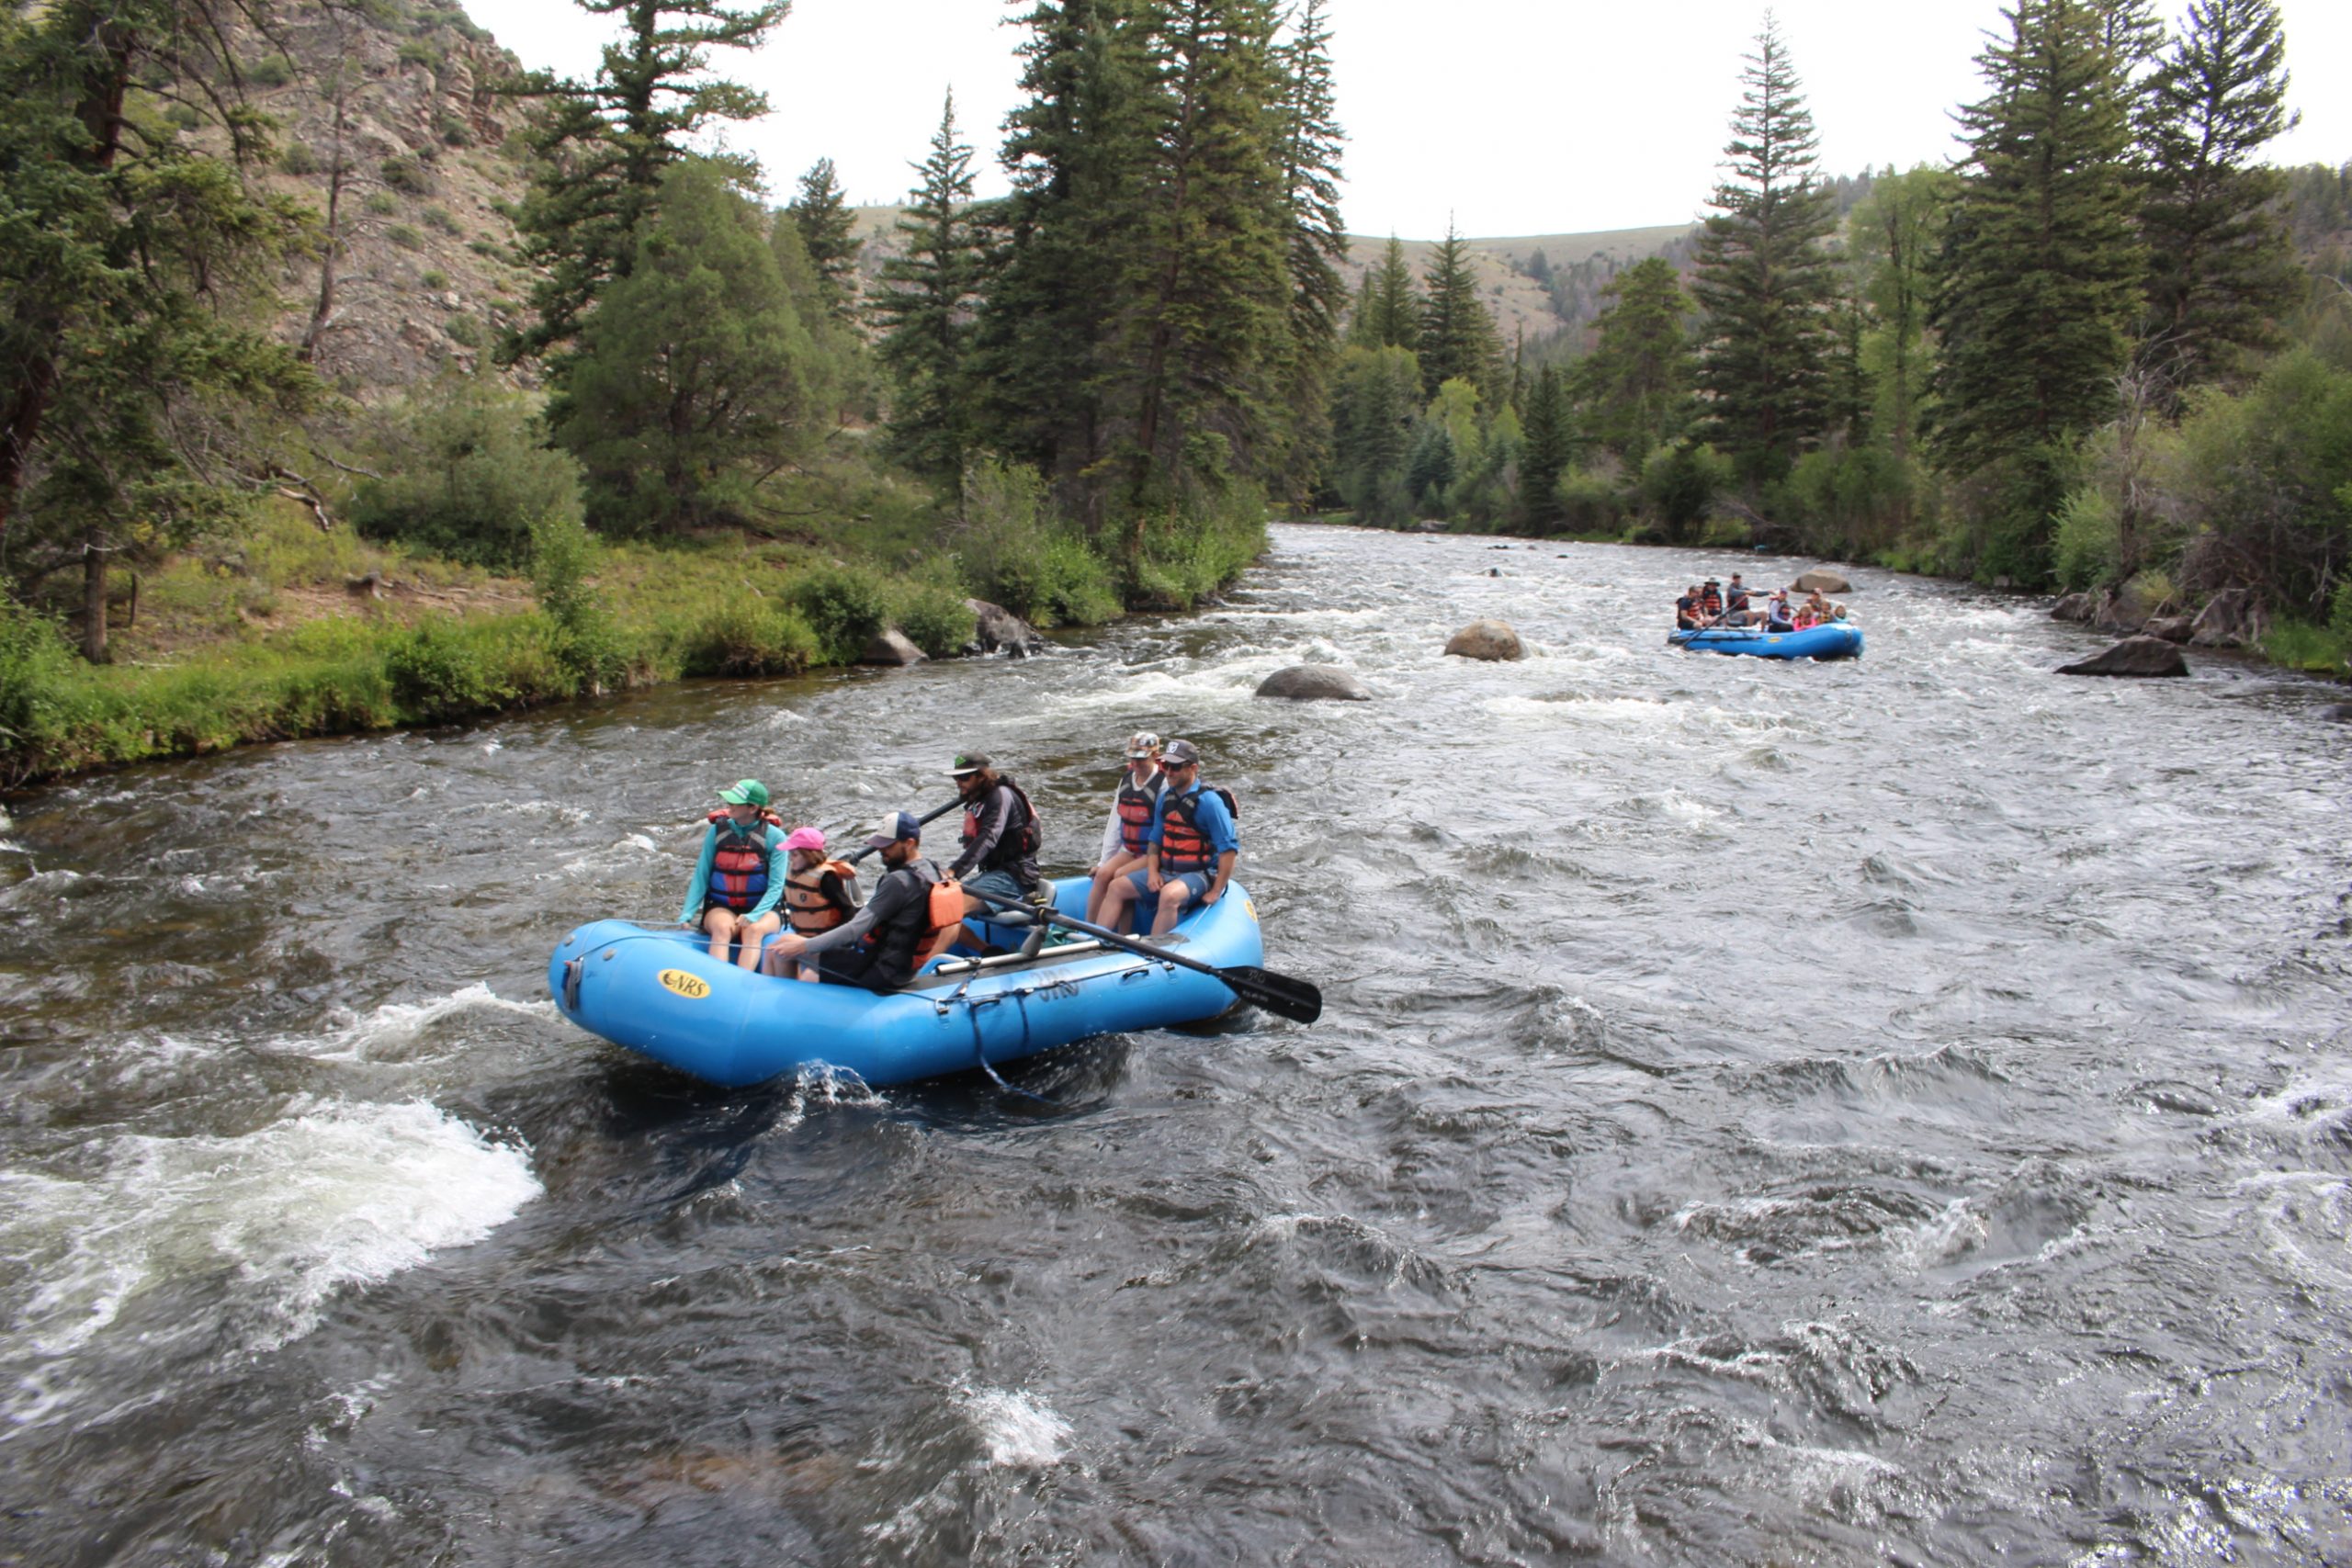 Gunnison Valley river rafting two blue rafts are rowed down a river.